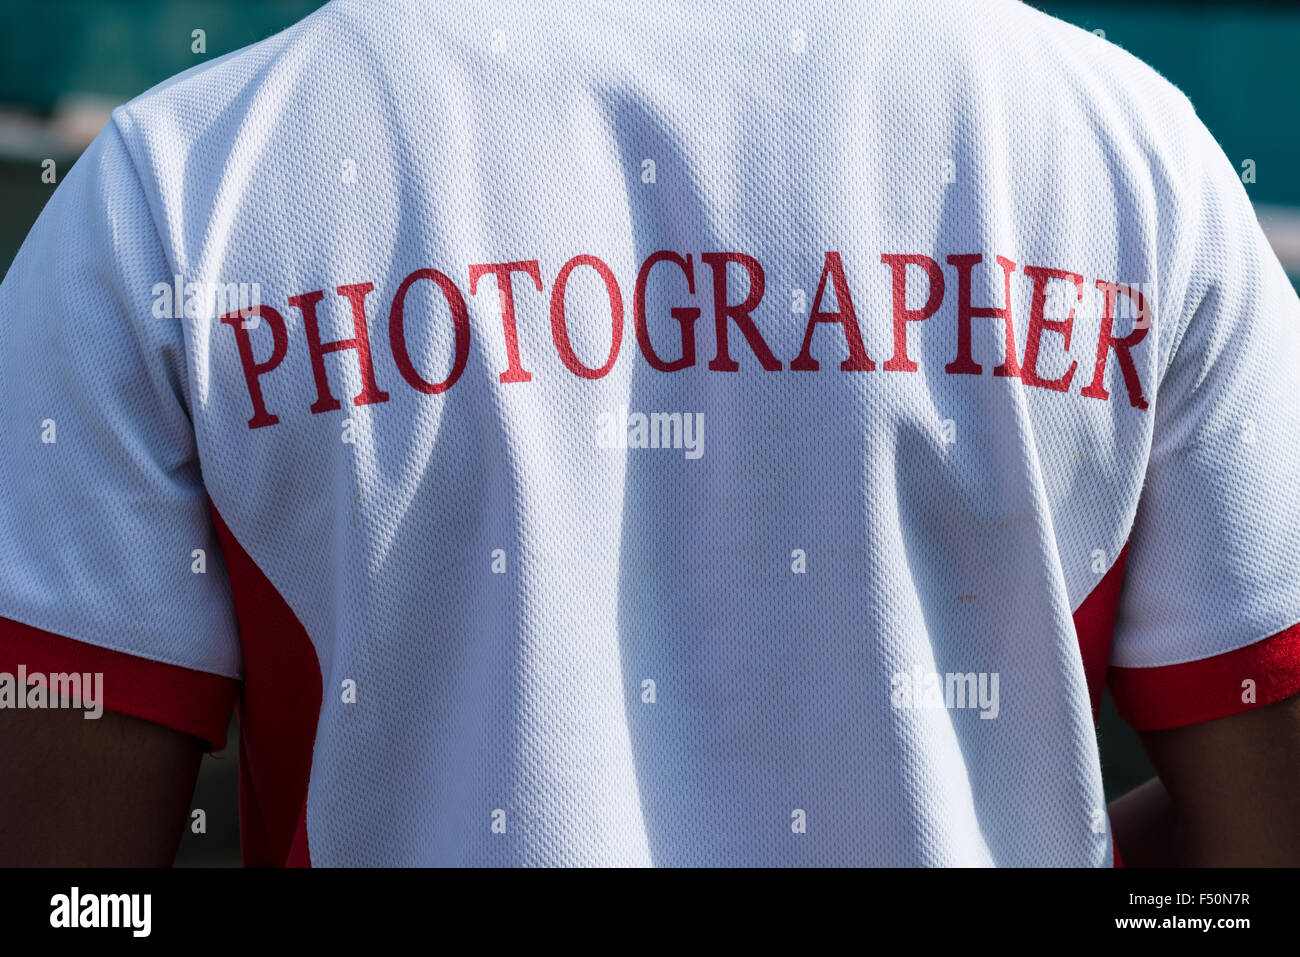 The back of a photographer's shirt with 'Photographer' written on it at Wonder La, the big amusement park outside of Bangalore. Stock Photo